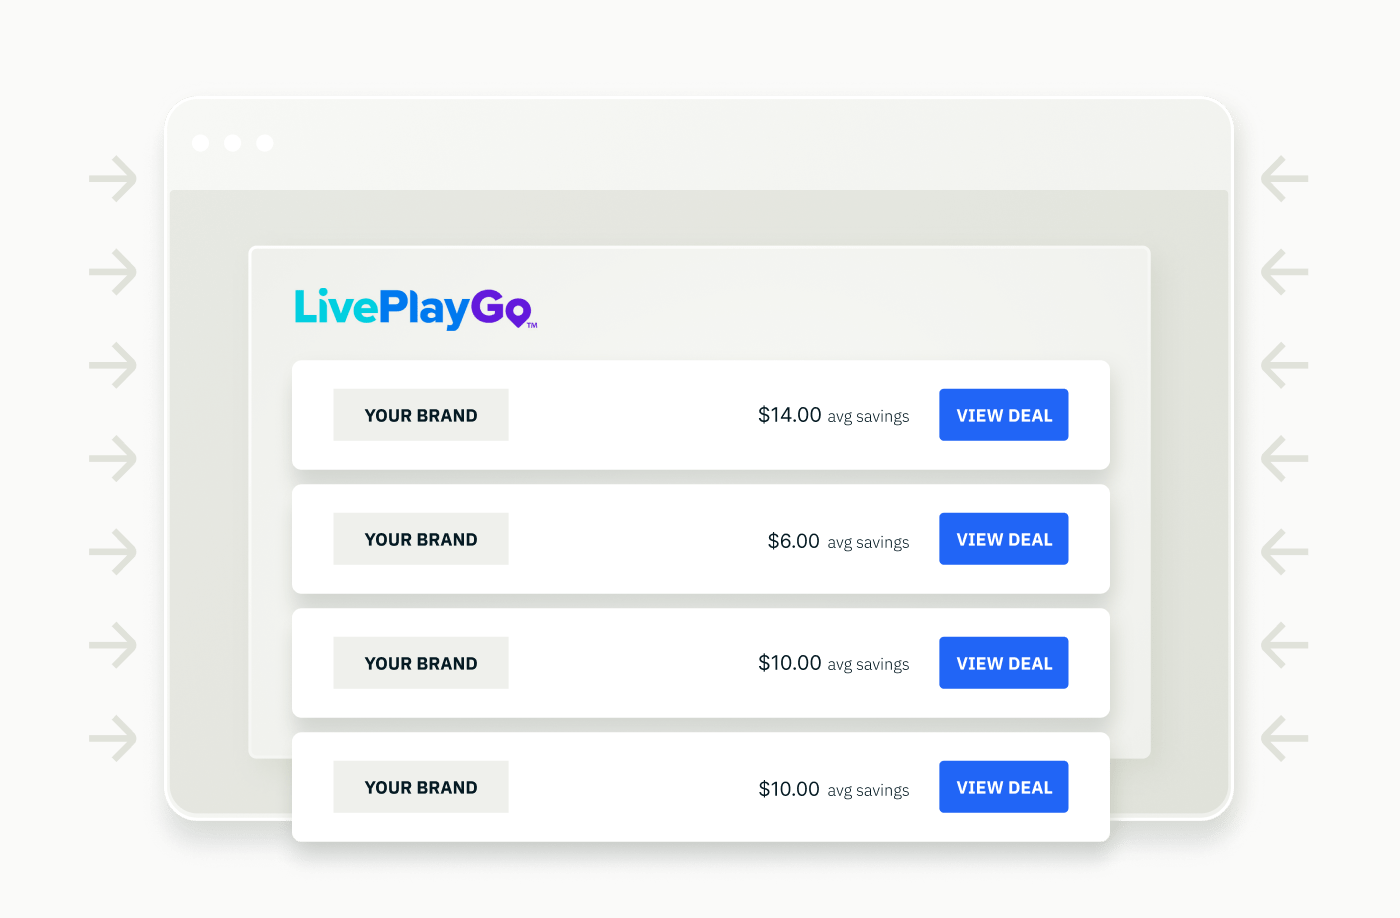 LivePlayGo page showing savings